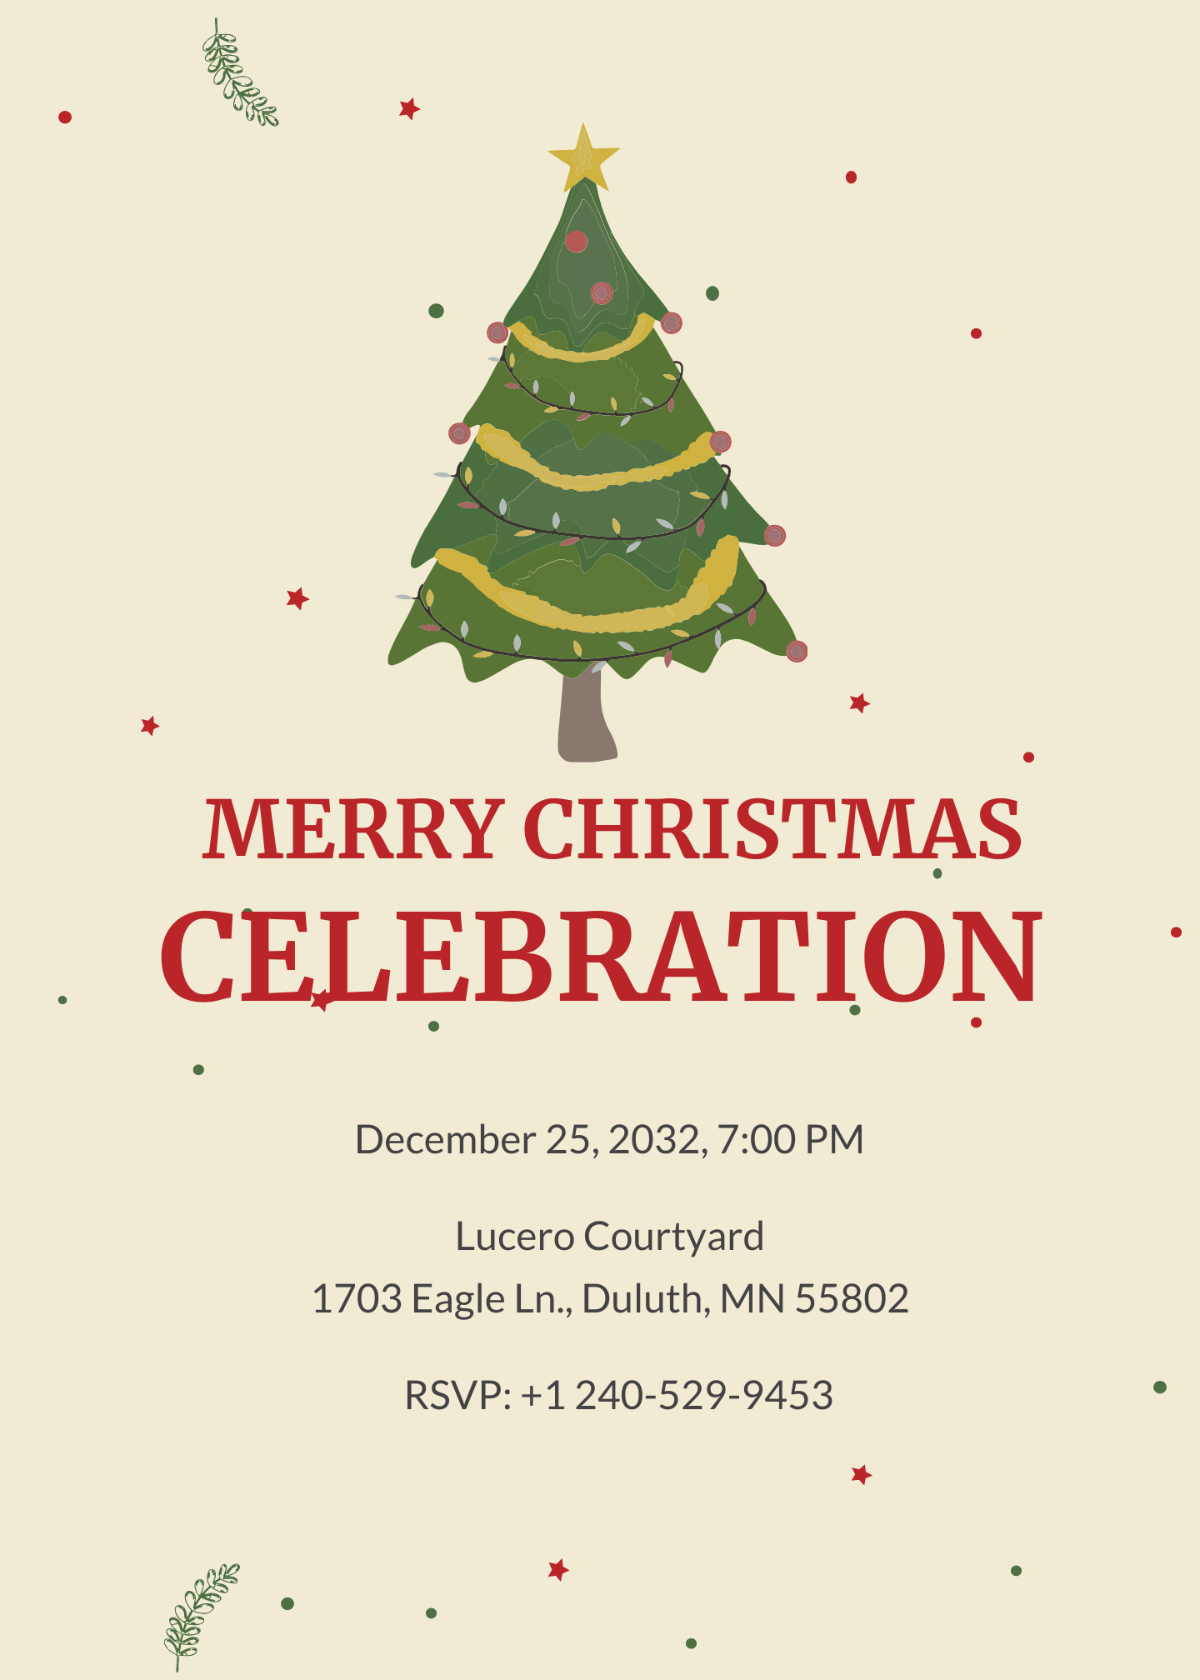 FREE Christmas Invitation Templates & Examples - Edit Online & Download ...